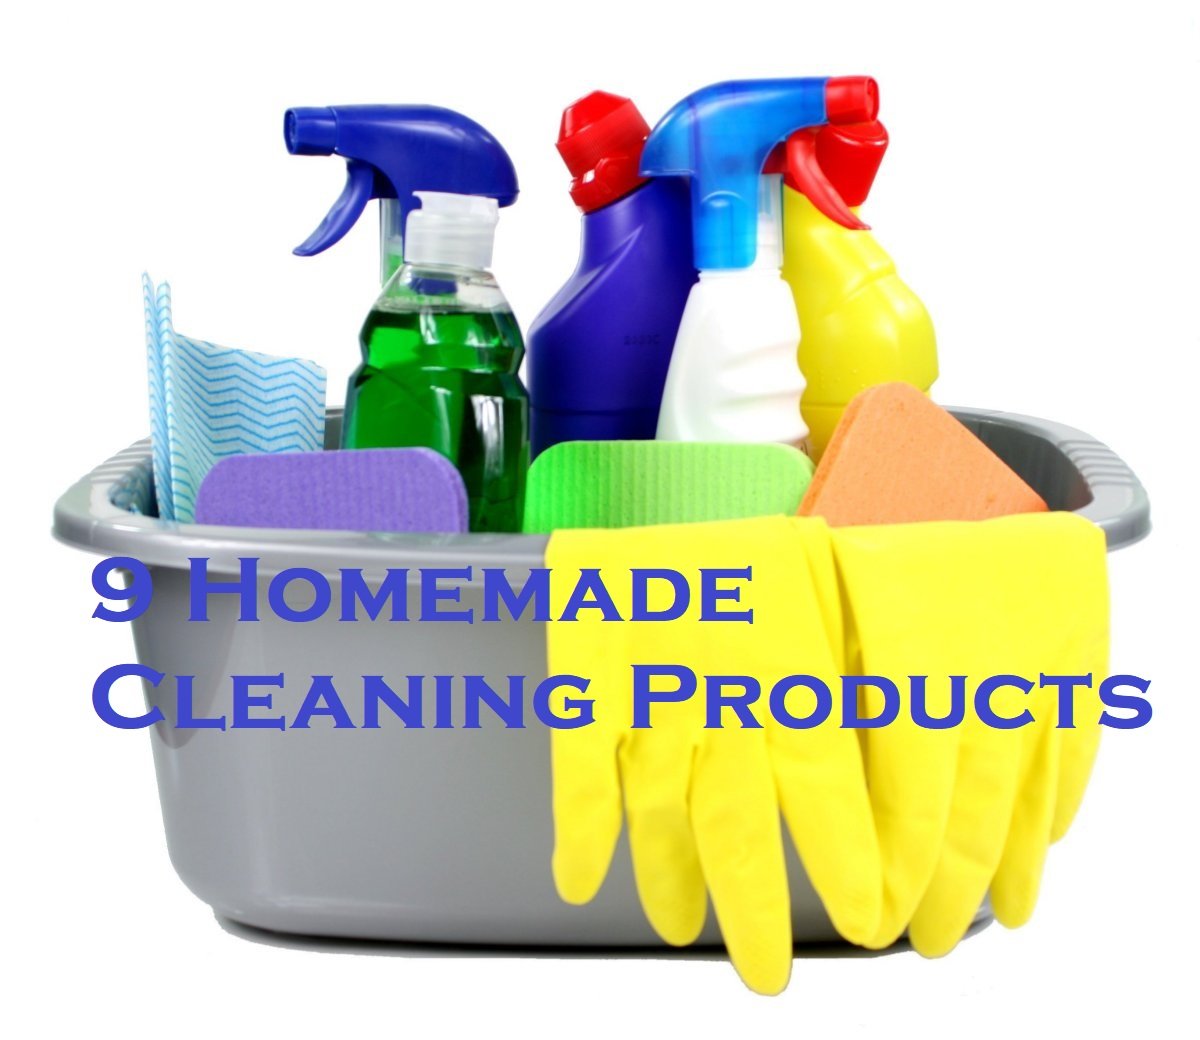 9 Homemade Cleaning Products